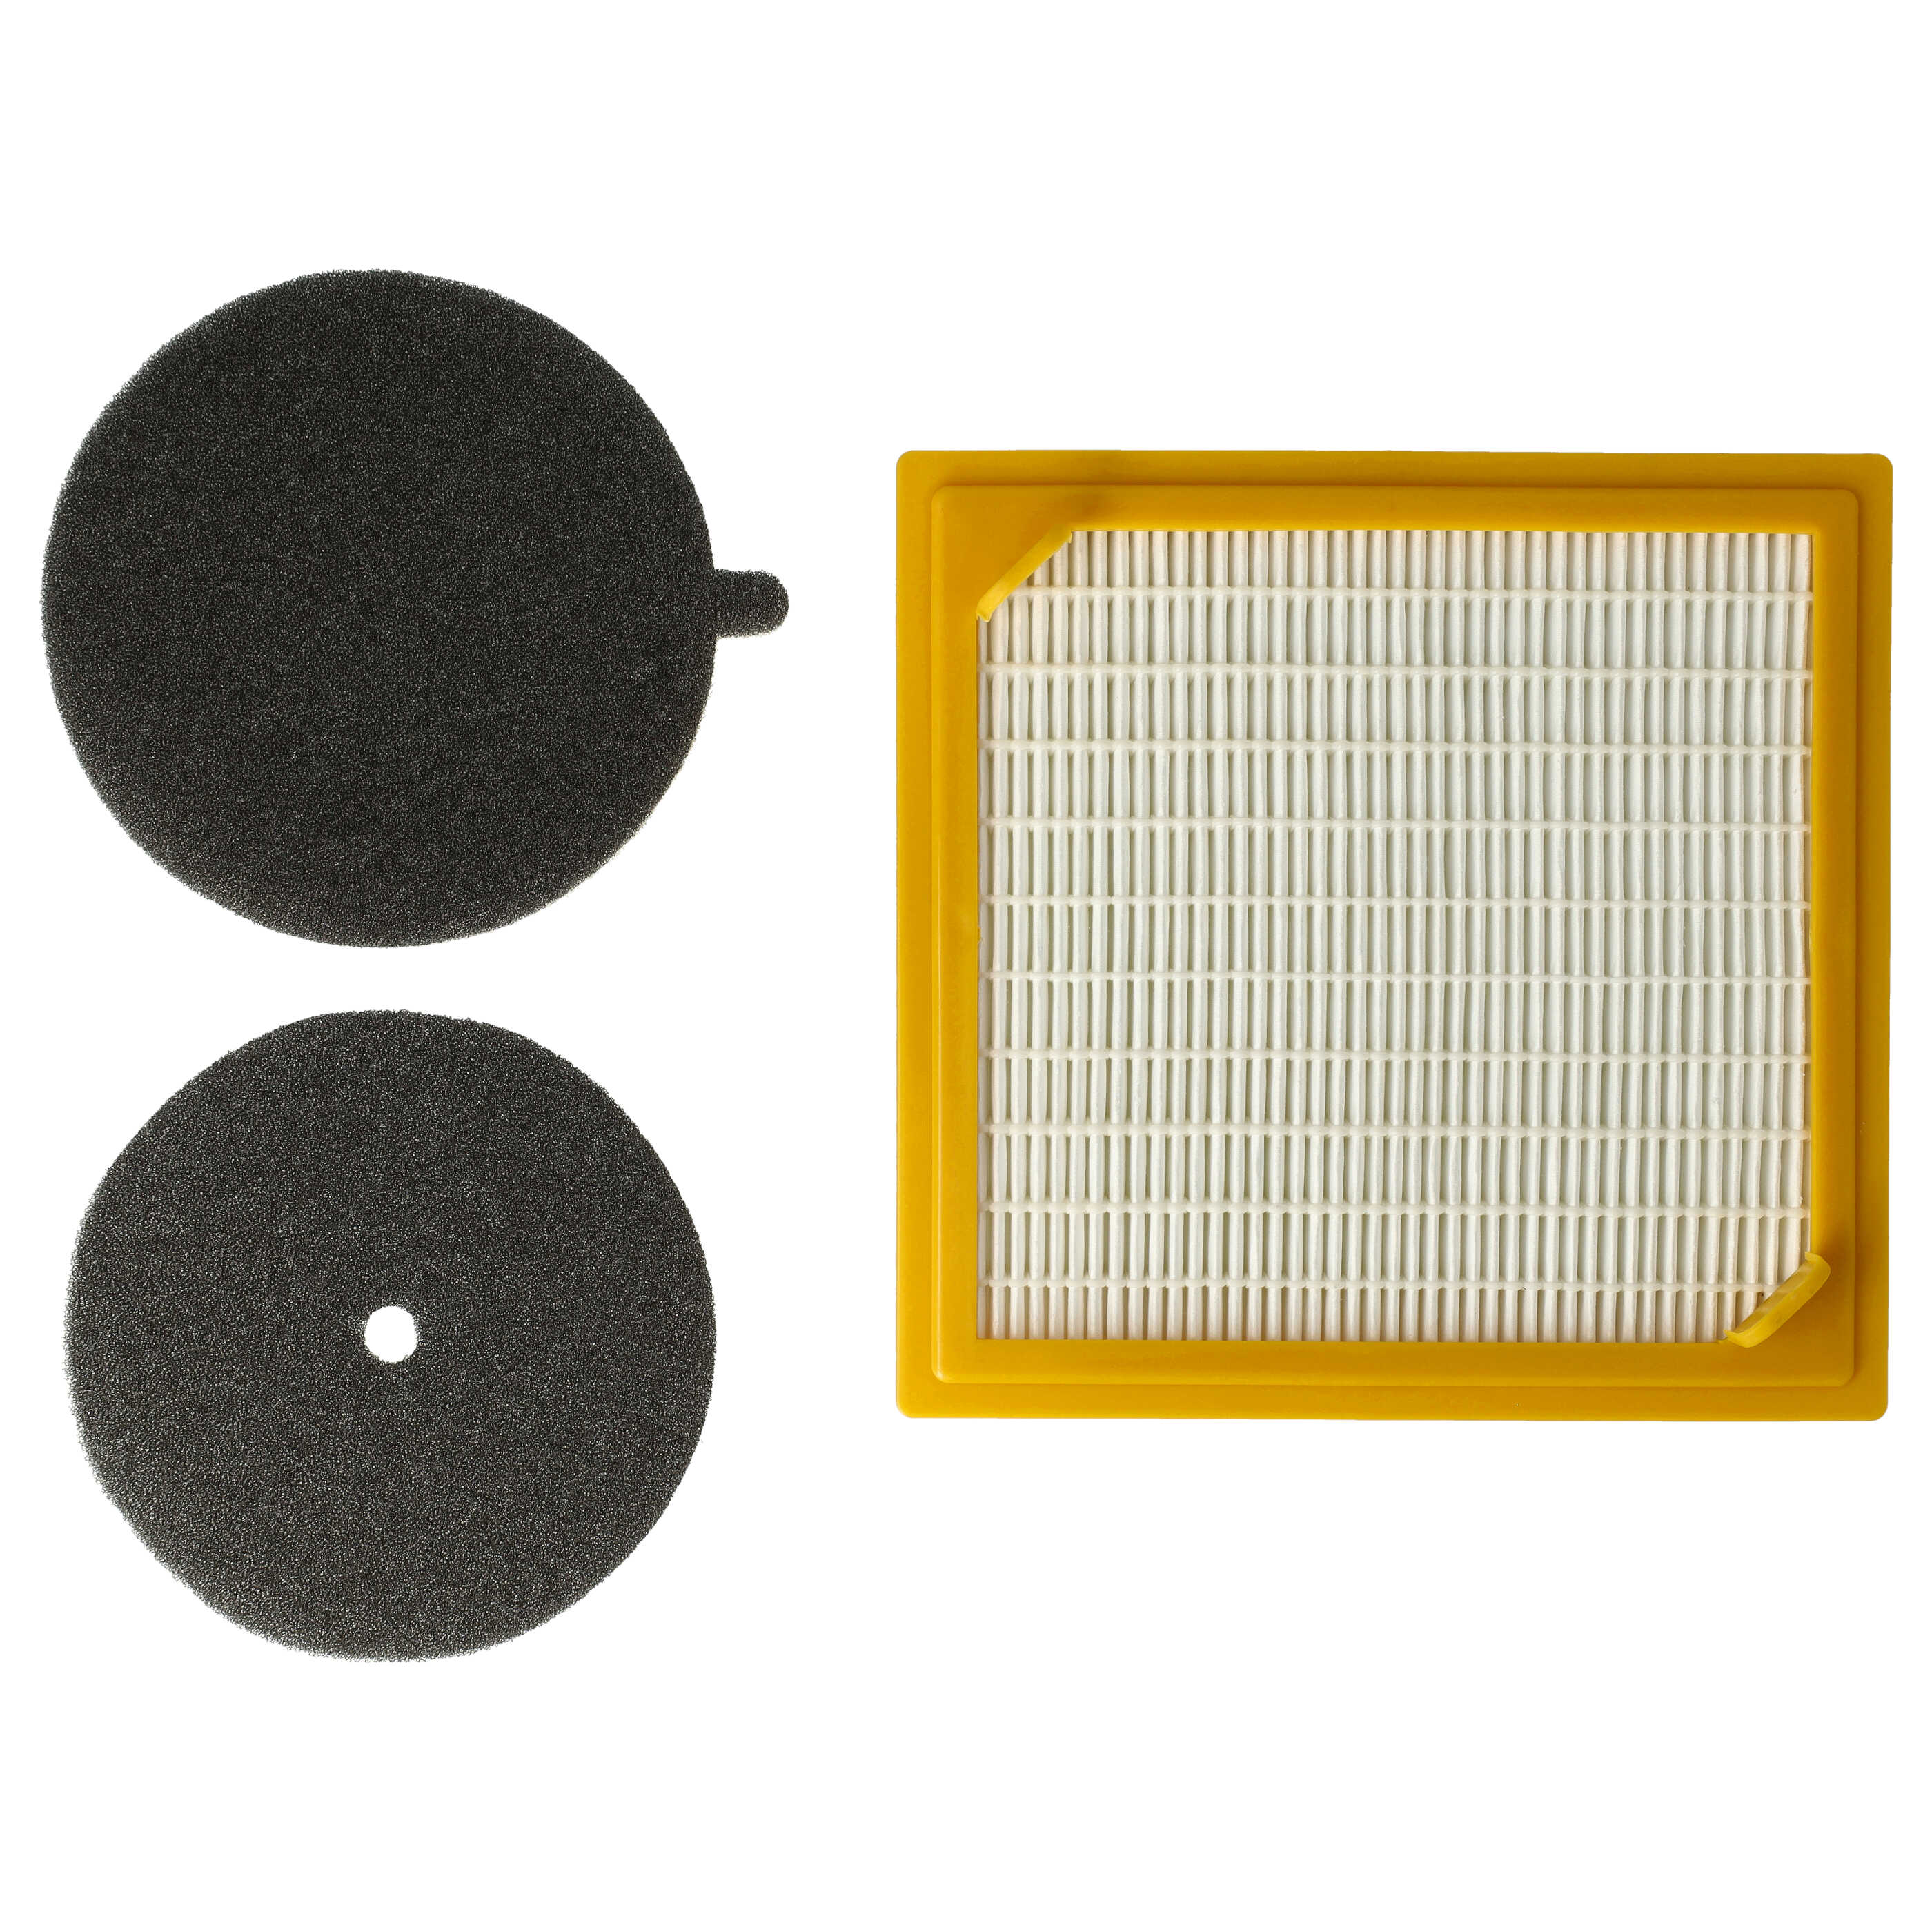 Filter Set replaces Hoover 09205469 for Hoover Vacuum Cleaner - 3 pcs